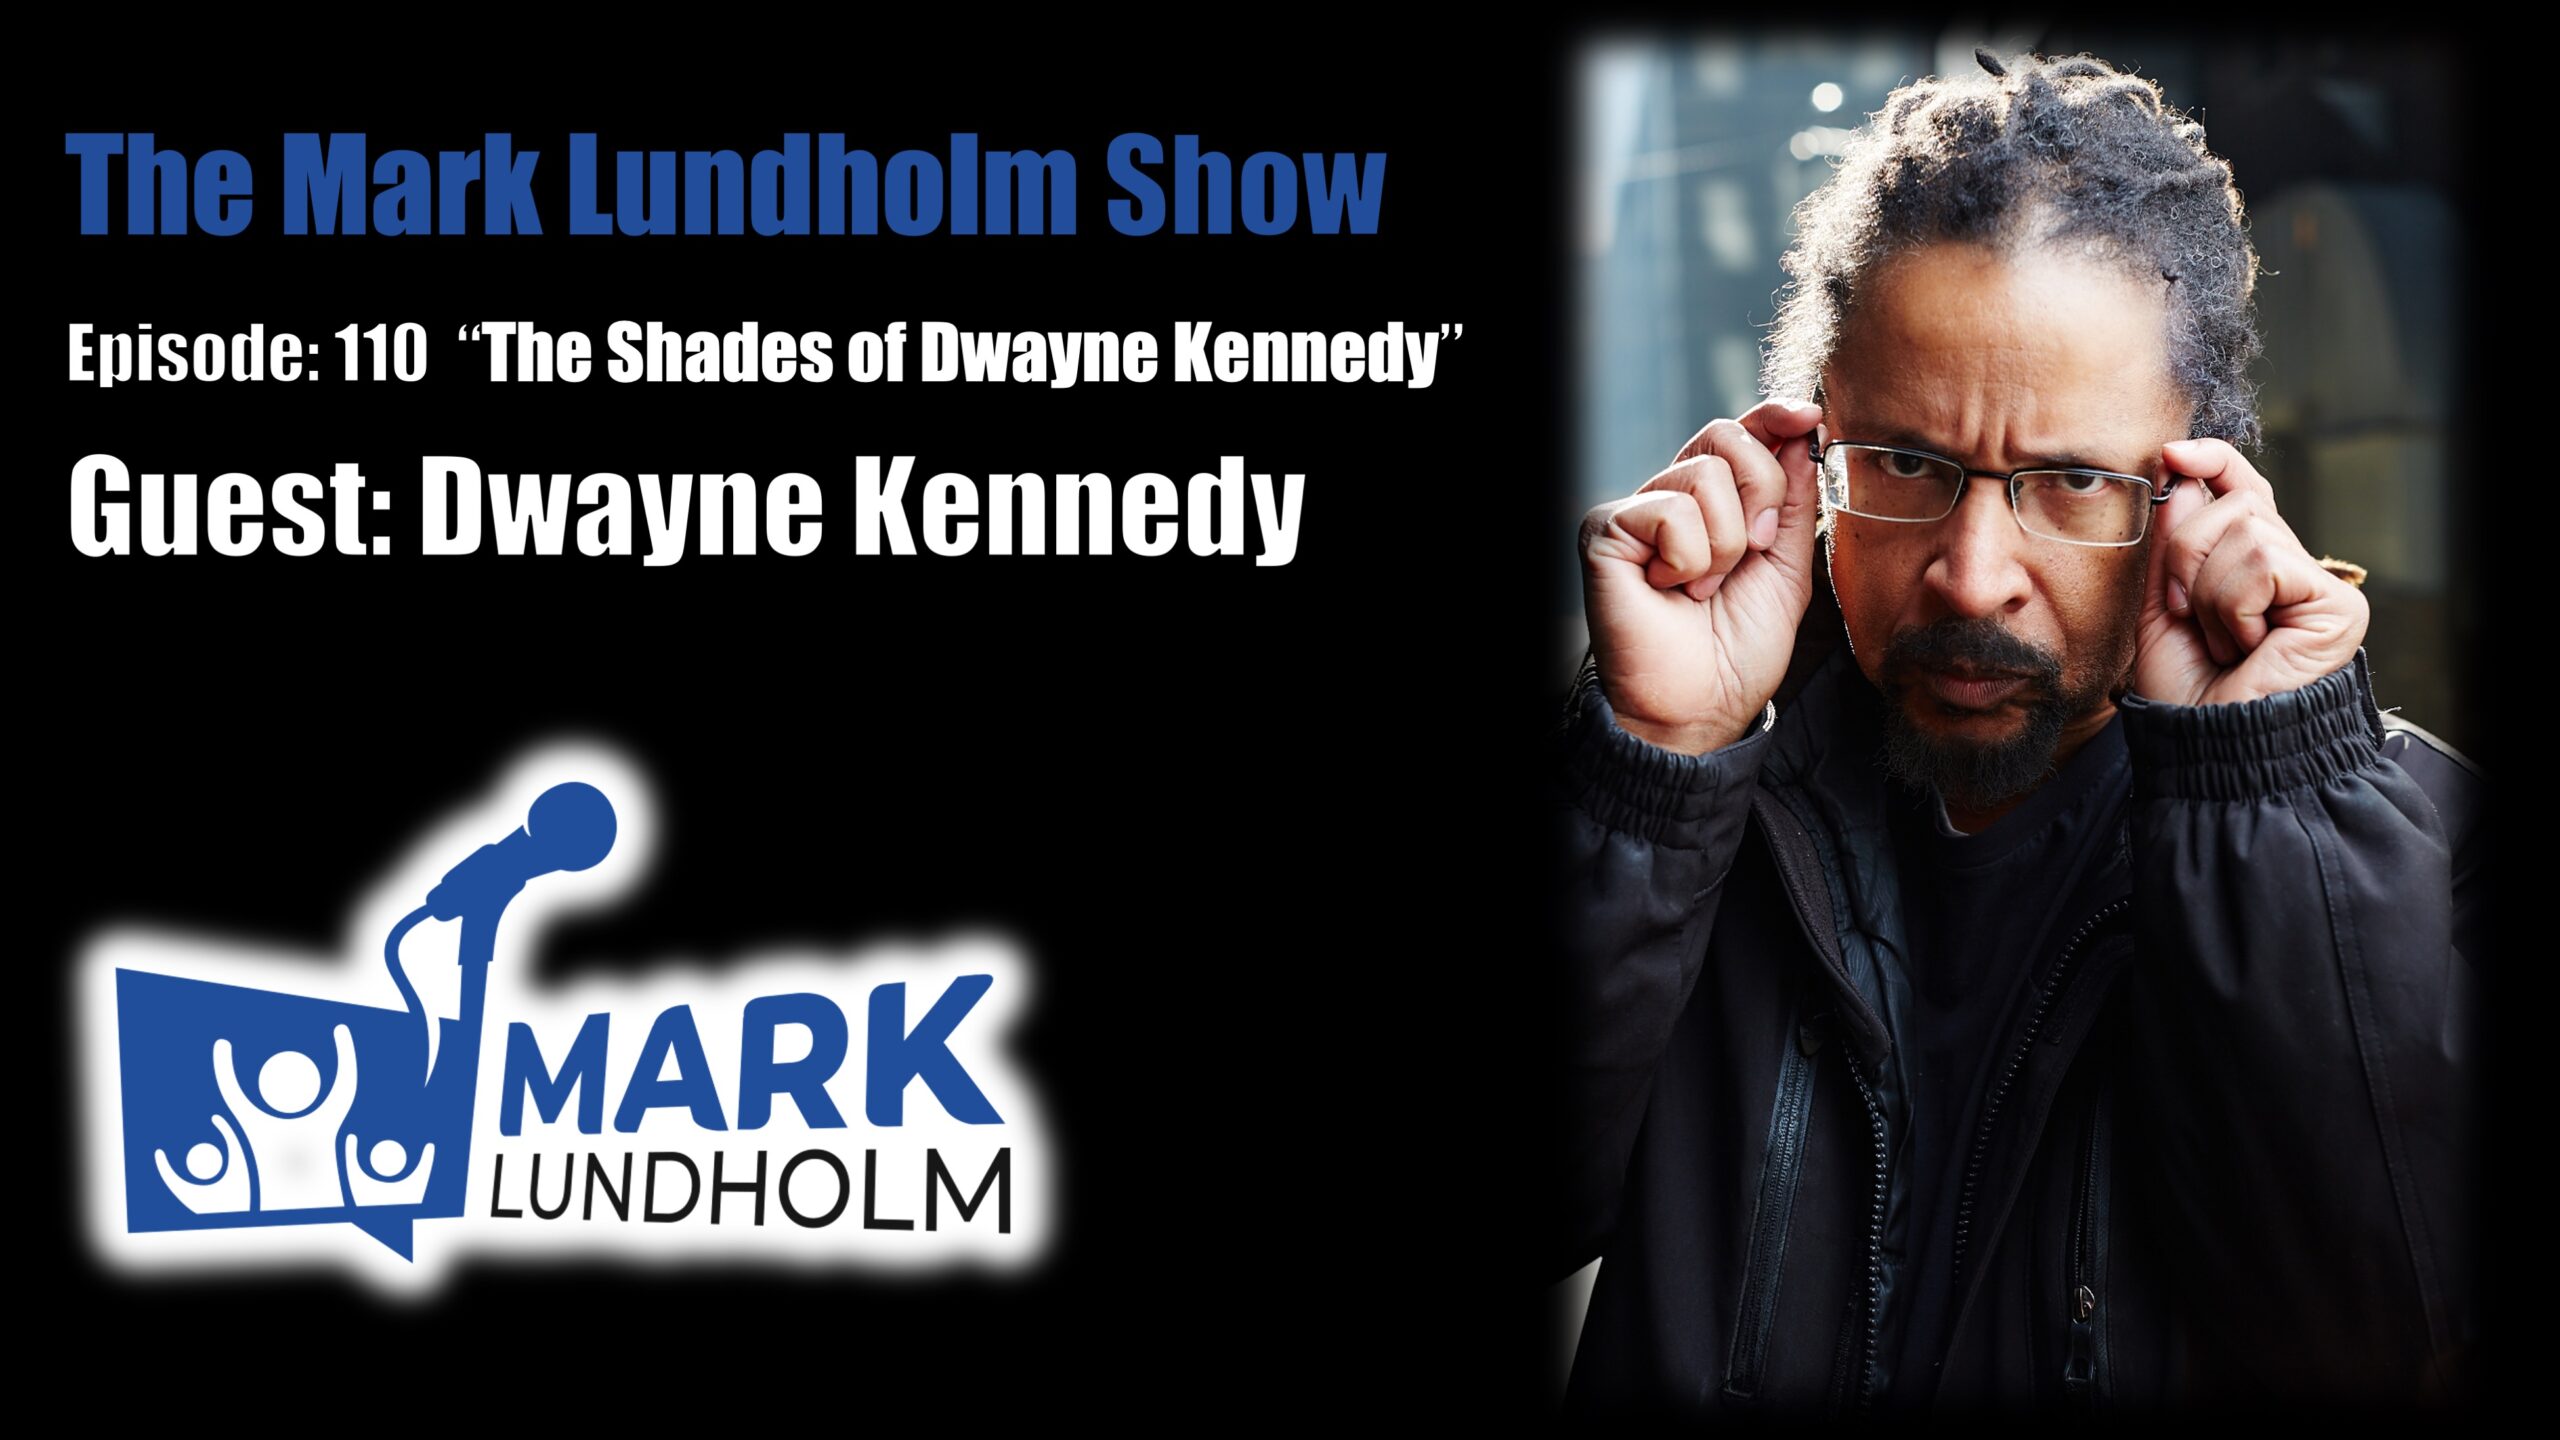 Episode 110: The Shades of Dwayne Kennedy